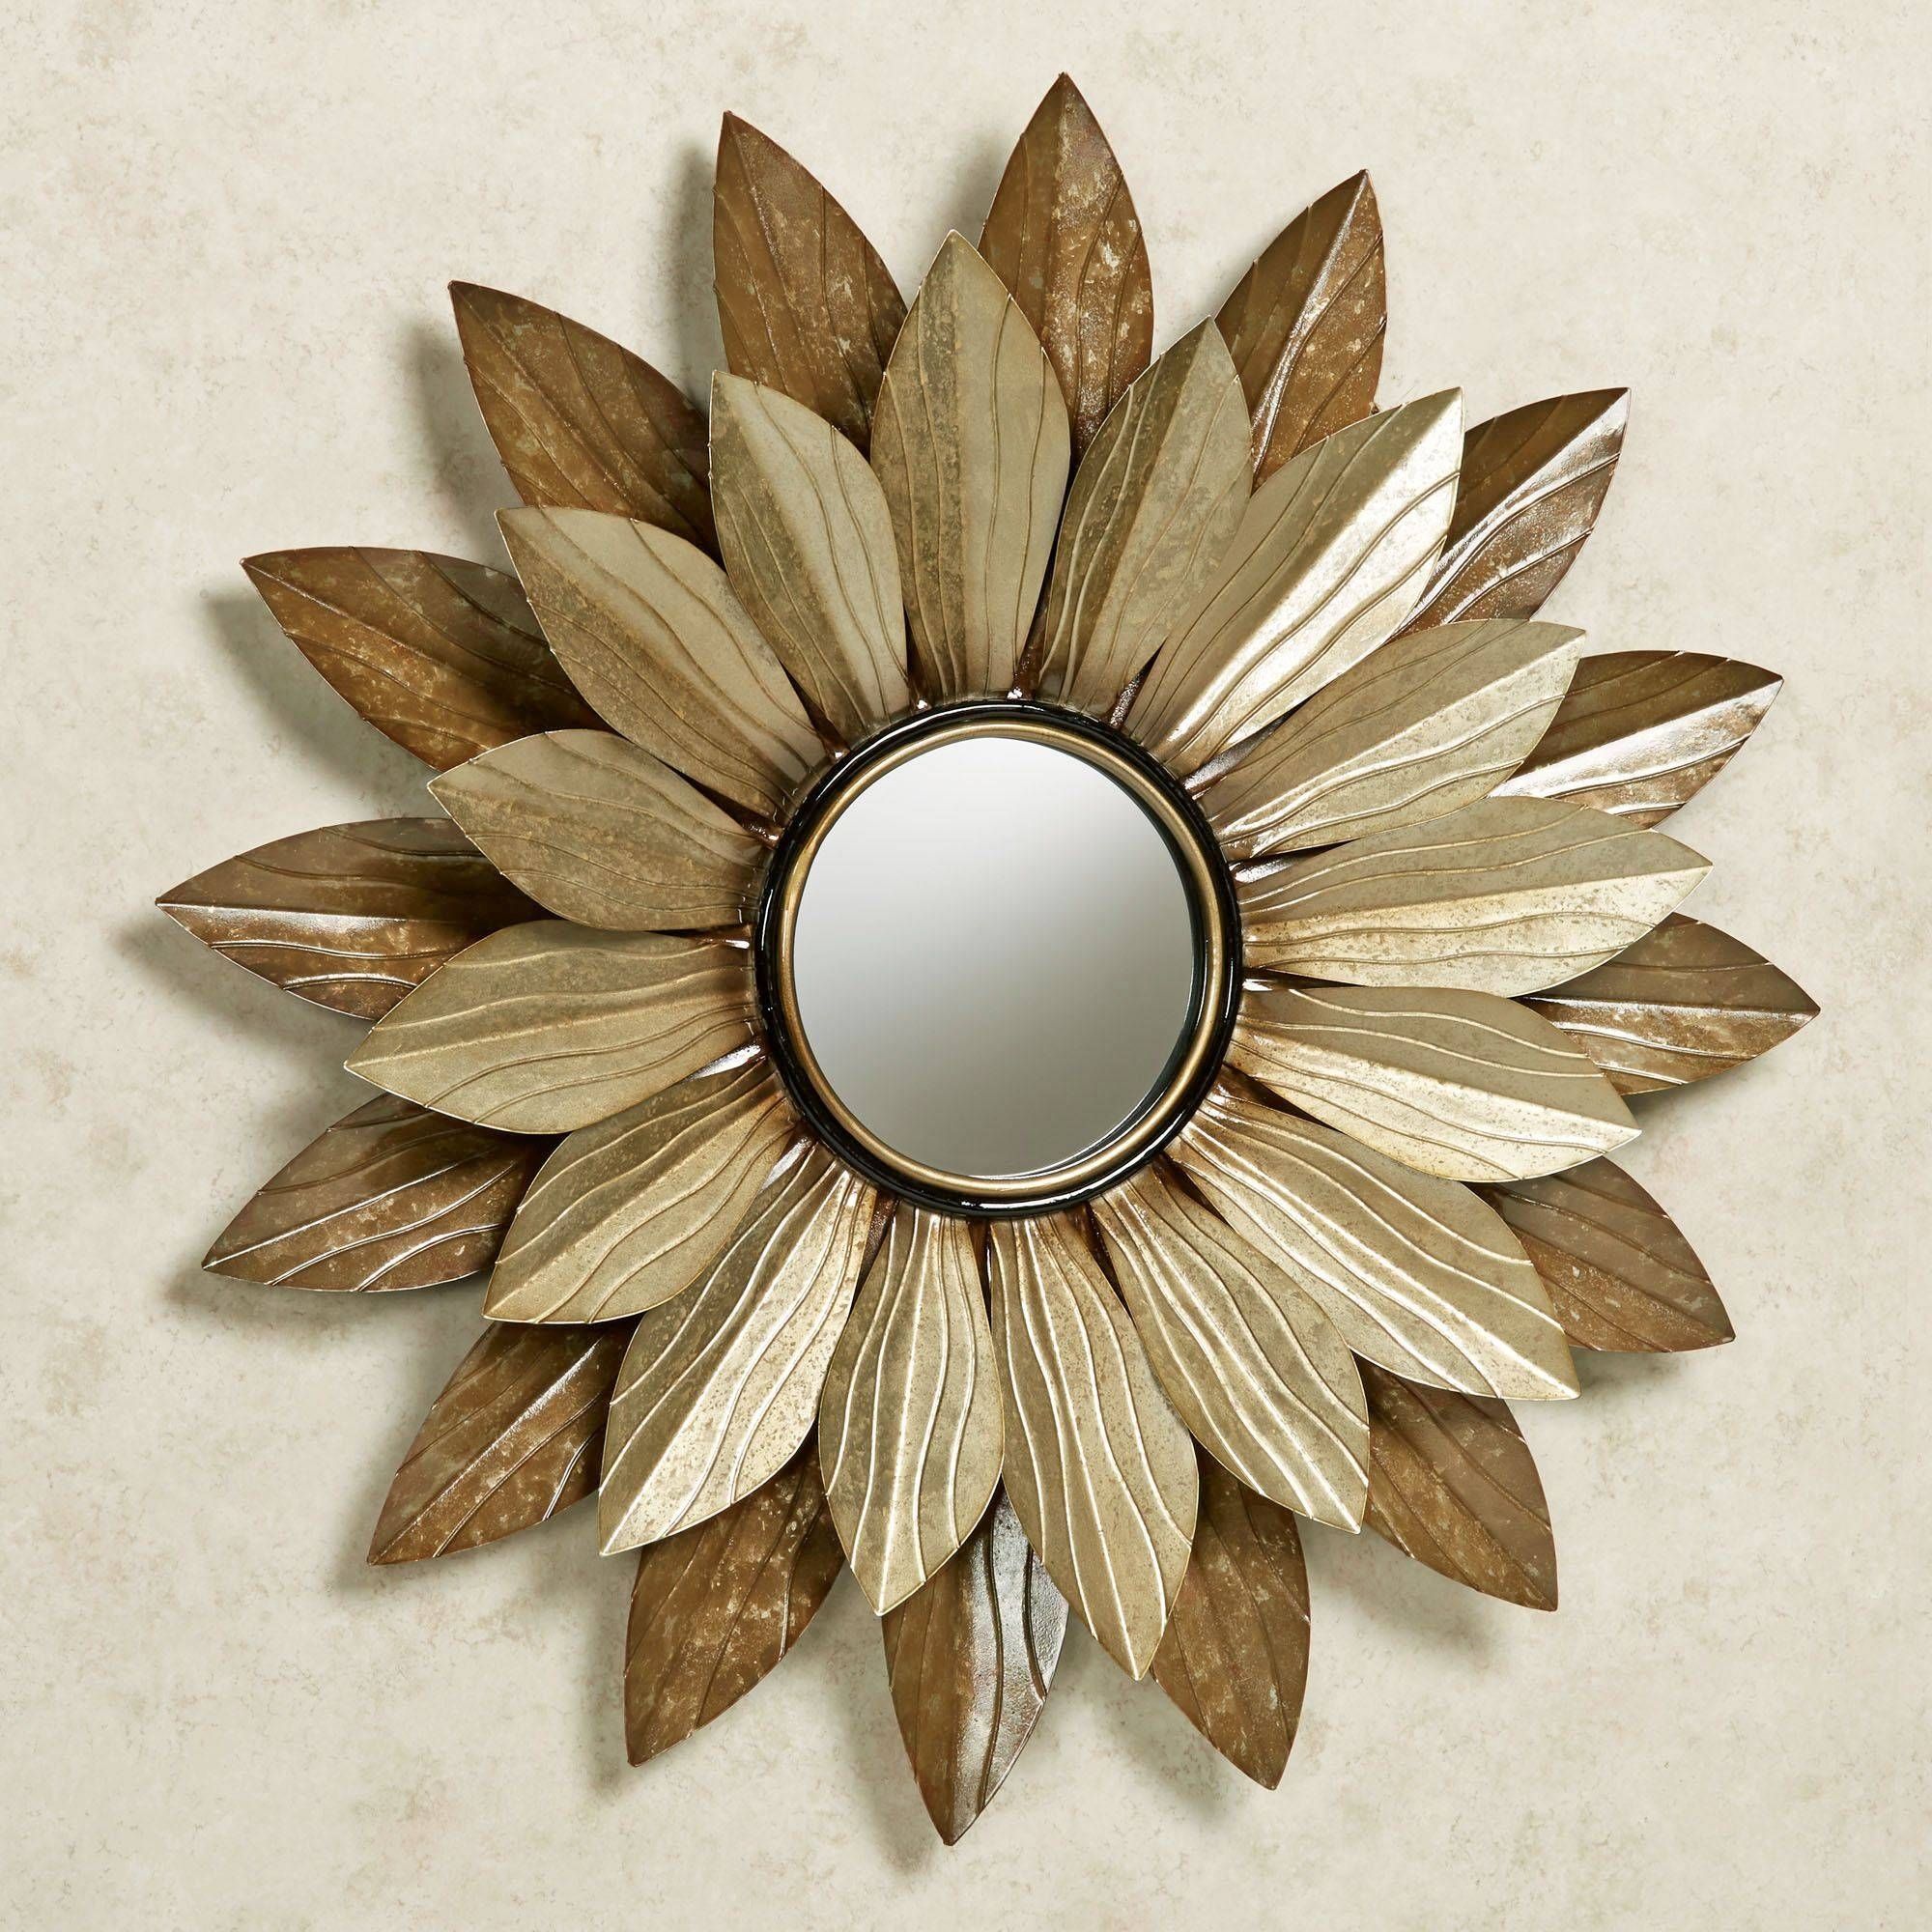 Abellina Layered Floral Mirrored Metal Wall Art Regarding Best And Newest Metallic Wall Art (View 20 of 25)